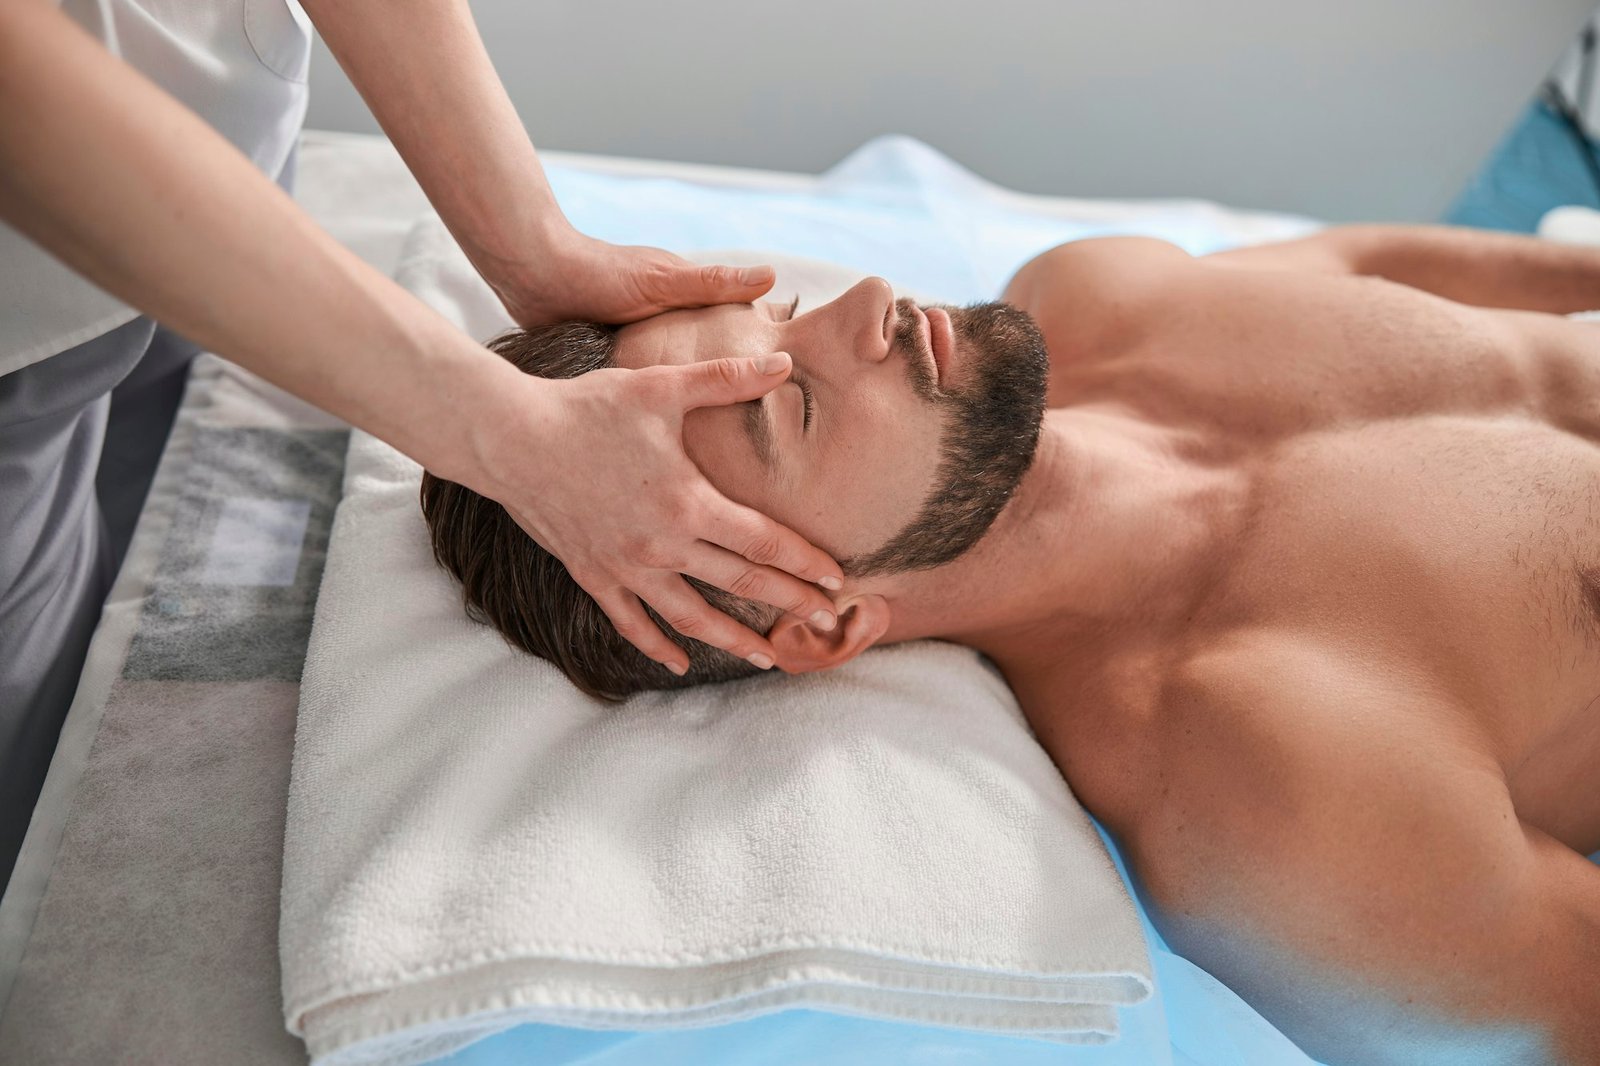 Massage therapist works with head of male lient lying on couch in contemporary clinic